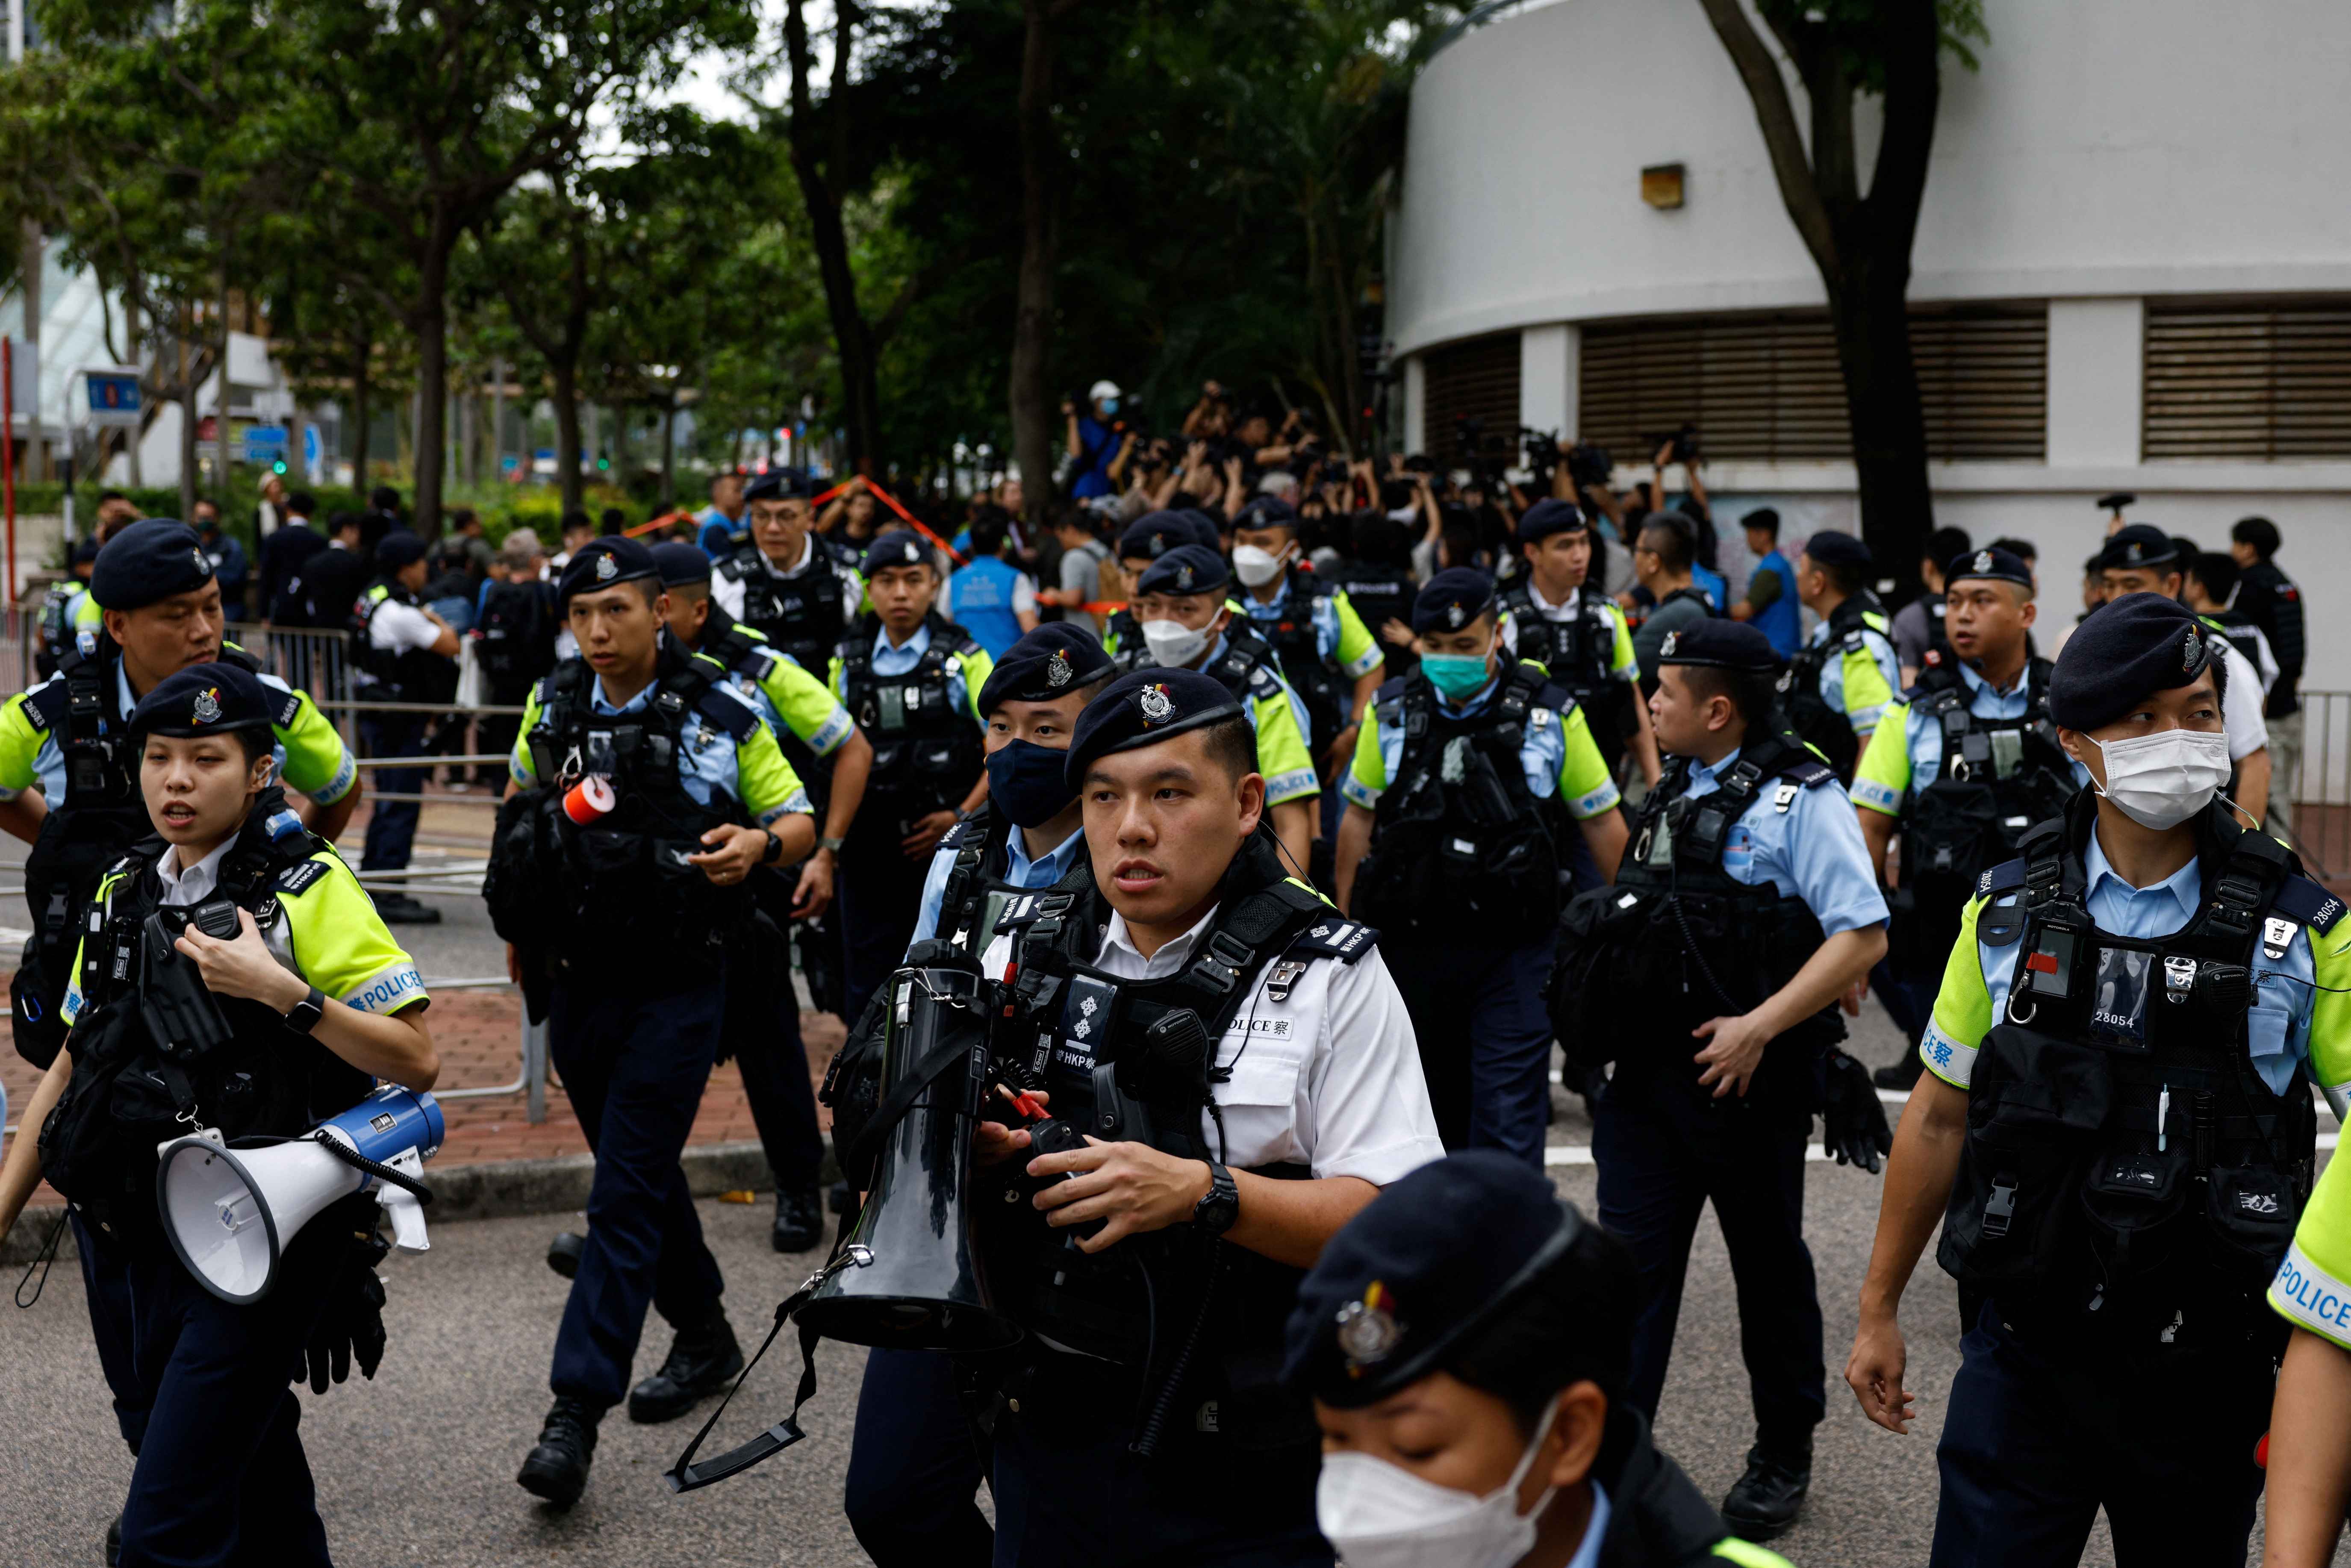 Police stand guard outside the West Kowloon Magistrates' Courts building during the verdict of the 47 pro-democracy activists charged under the national security law, in Hong Kong